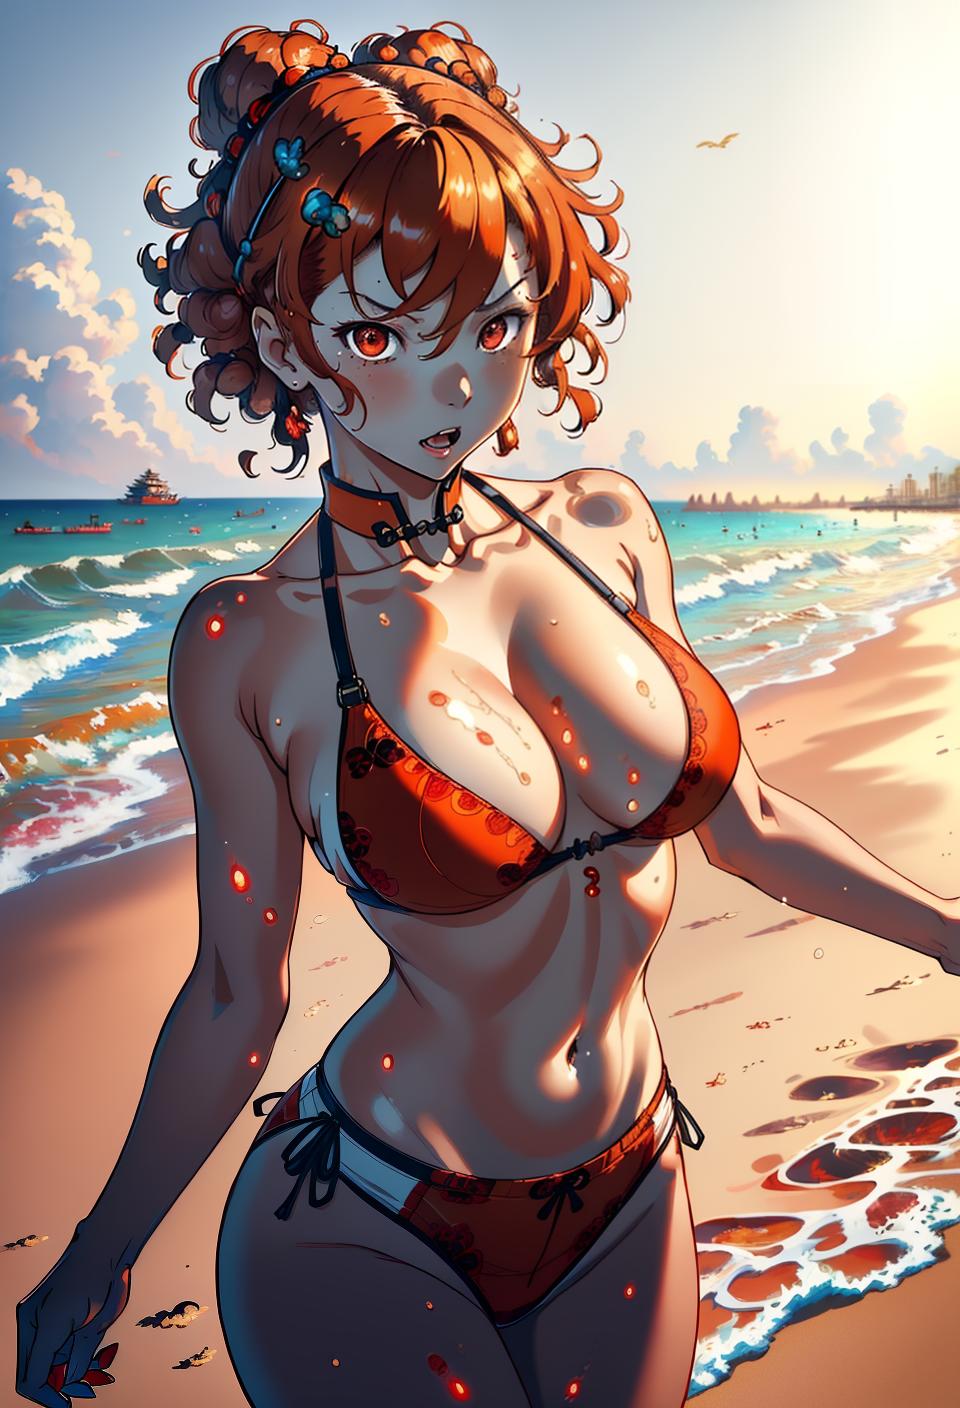  ((trending, highres, masterpiece, cinematic shot)), 1girl, mature, female aristocrat, large, beach scene, very short curly orange hair, hair in Chinese buns, large red eyes, energetic personality, angry expression, tanned skin, morbid, limber